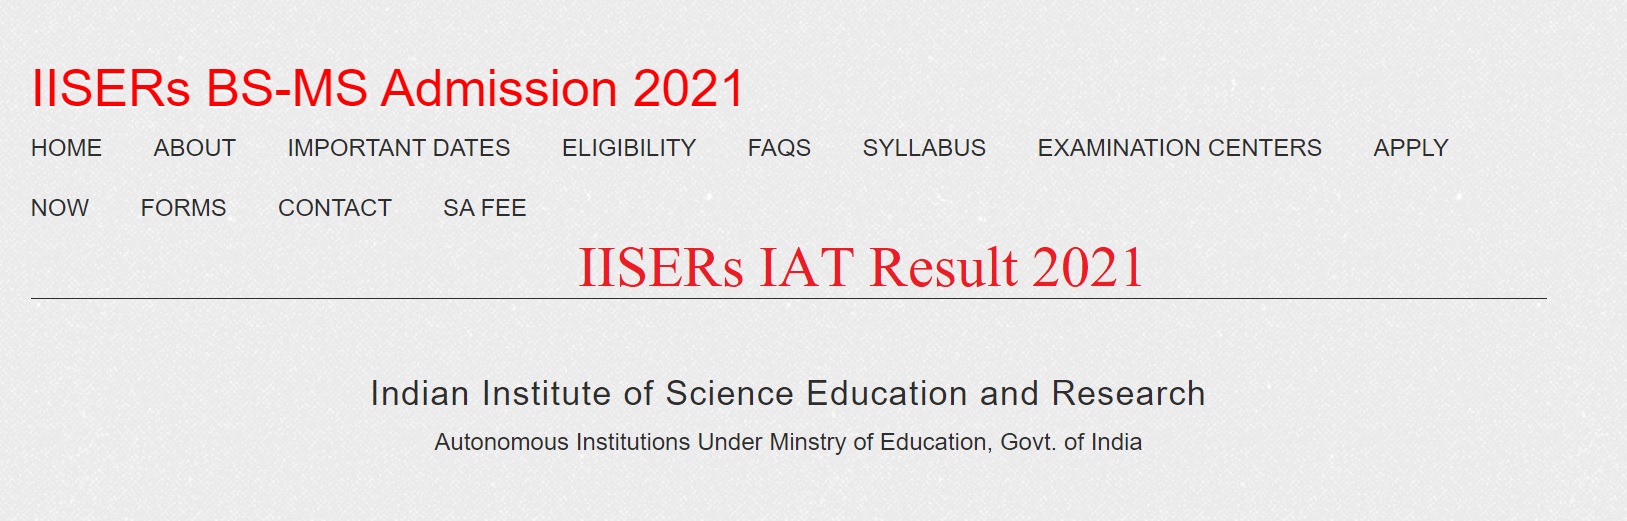 iiser-iat-result-2021-iiseradmission-in-check-iiser-iat-cut-off-marks